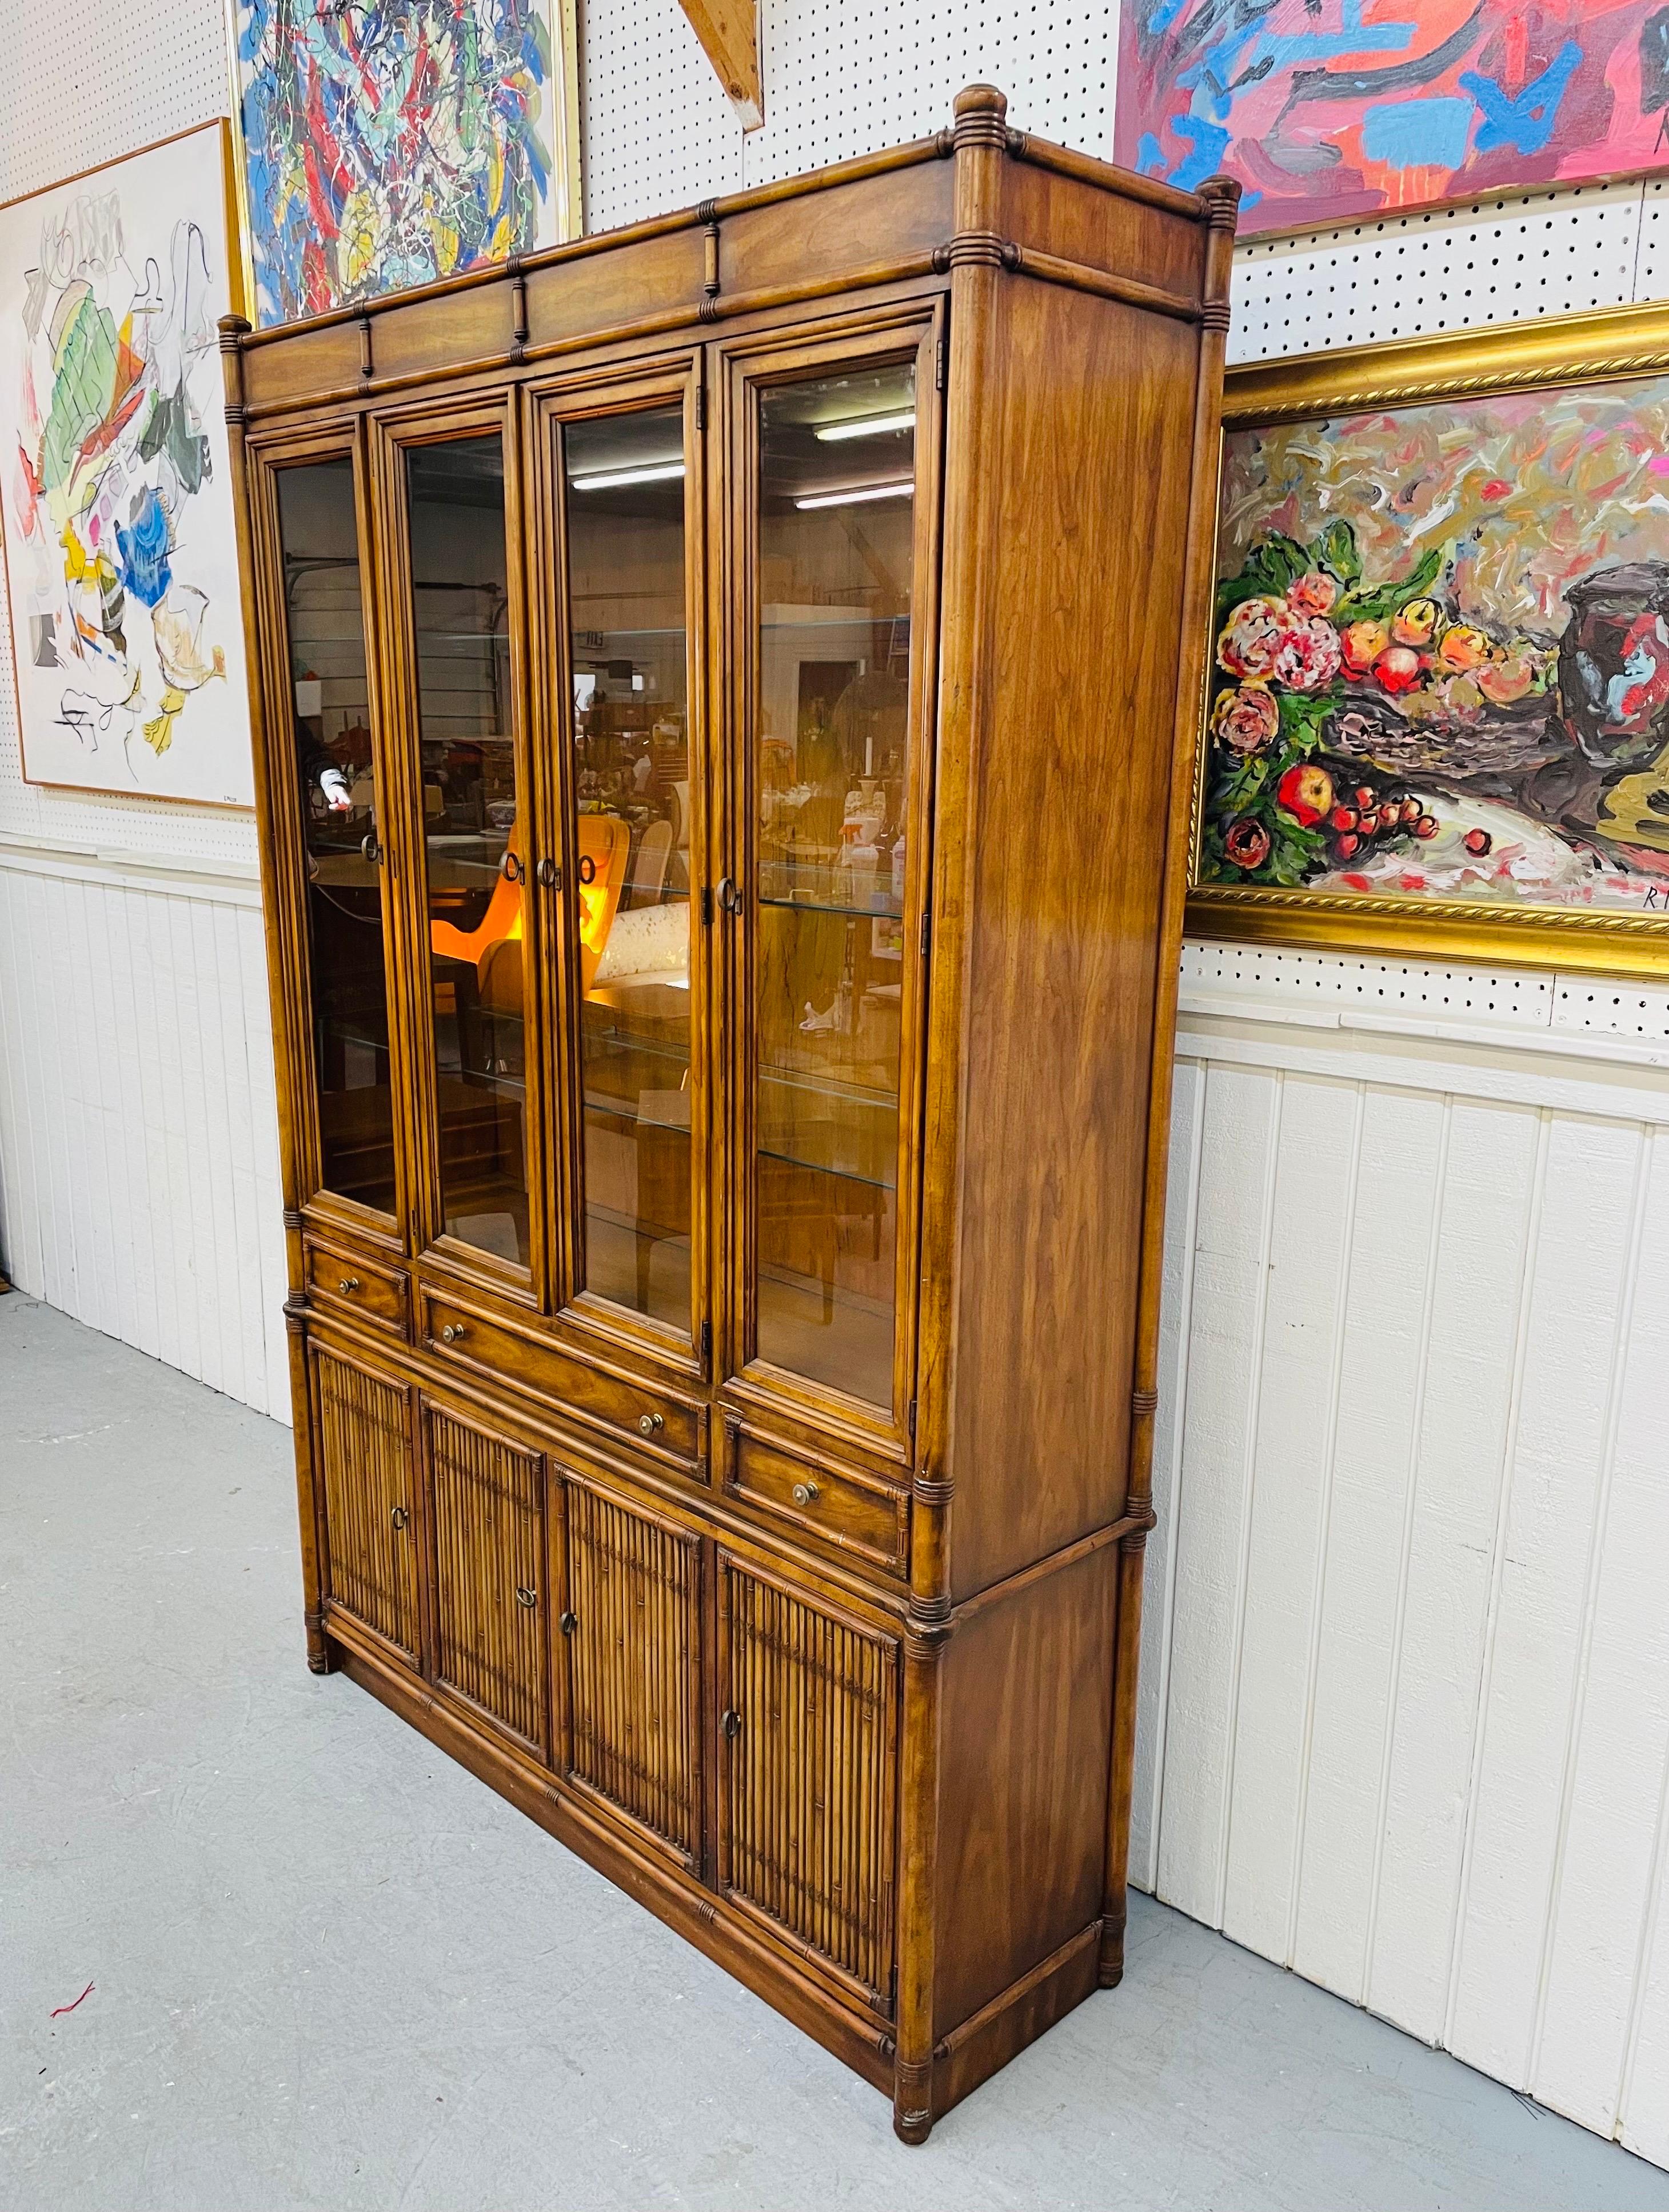 This listing is for a vintage Drexel Heritage Bamboo Style Walnut Breakfront. Featuring four glass doors that open up to three glass shelves, four wooden doors with reeded fronts that open up to storage space, original hardware, a bamboo style